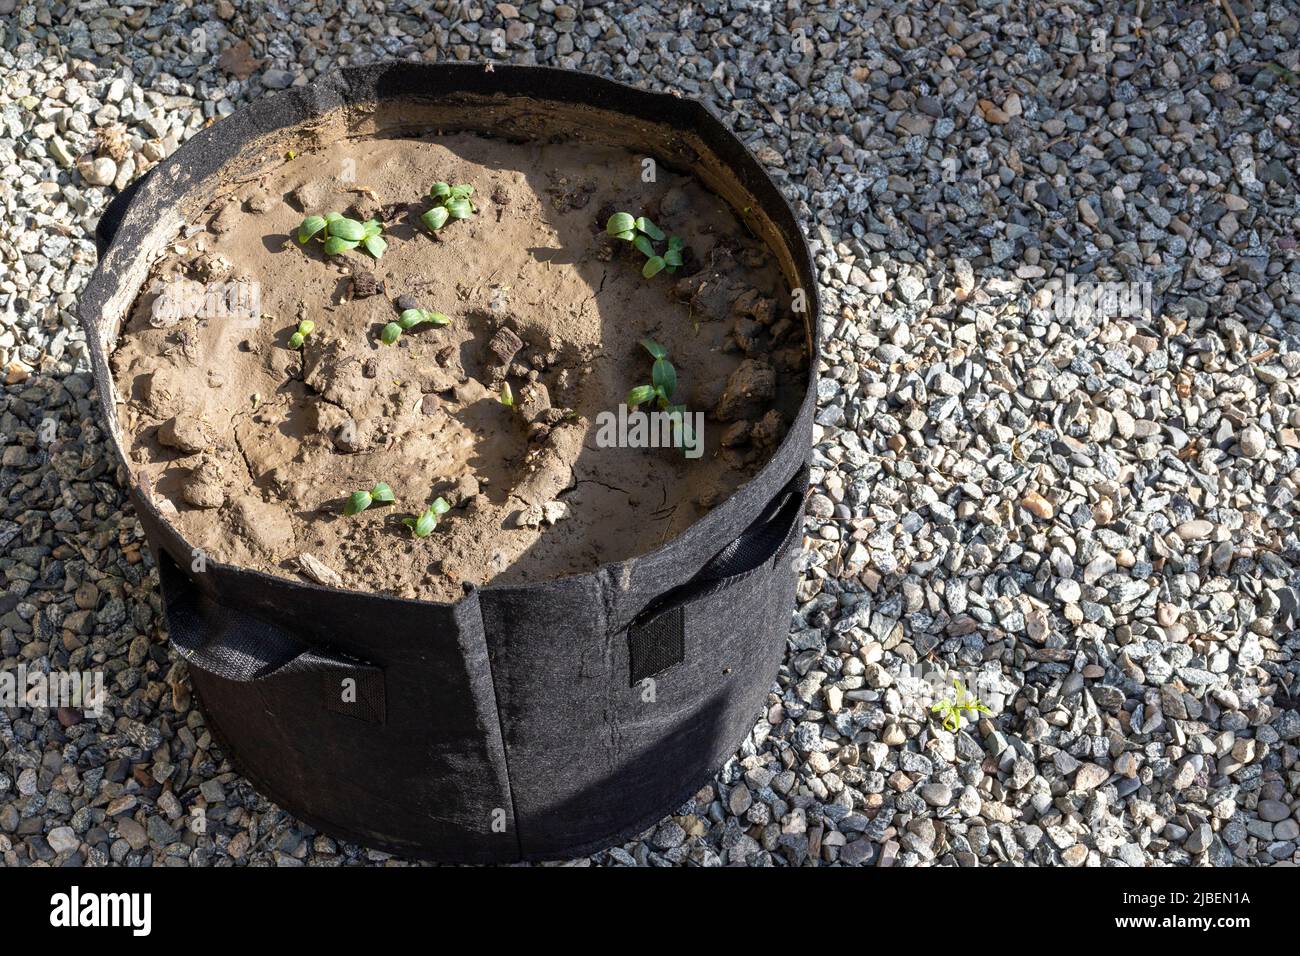 Vegetable growing in black grow bag or home gardening in grow bags concept Stock Photo